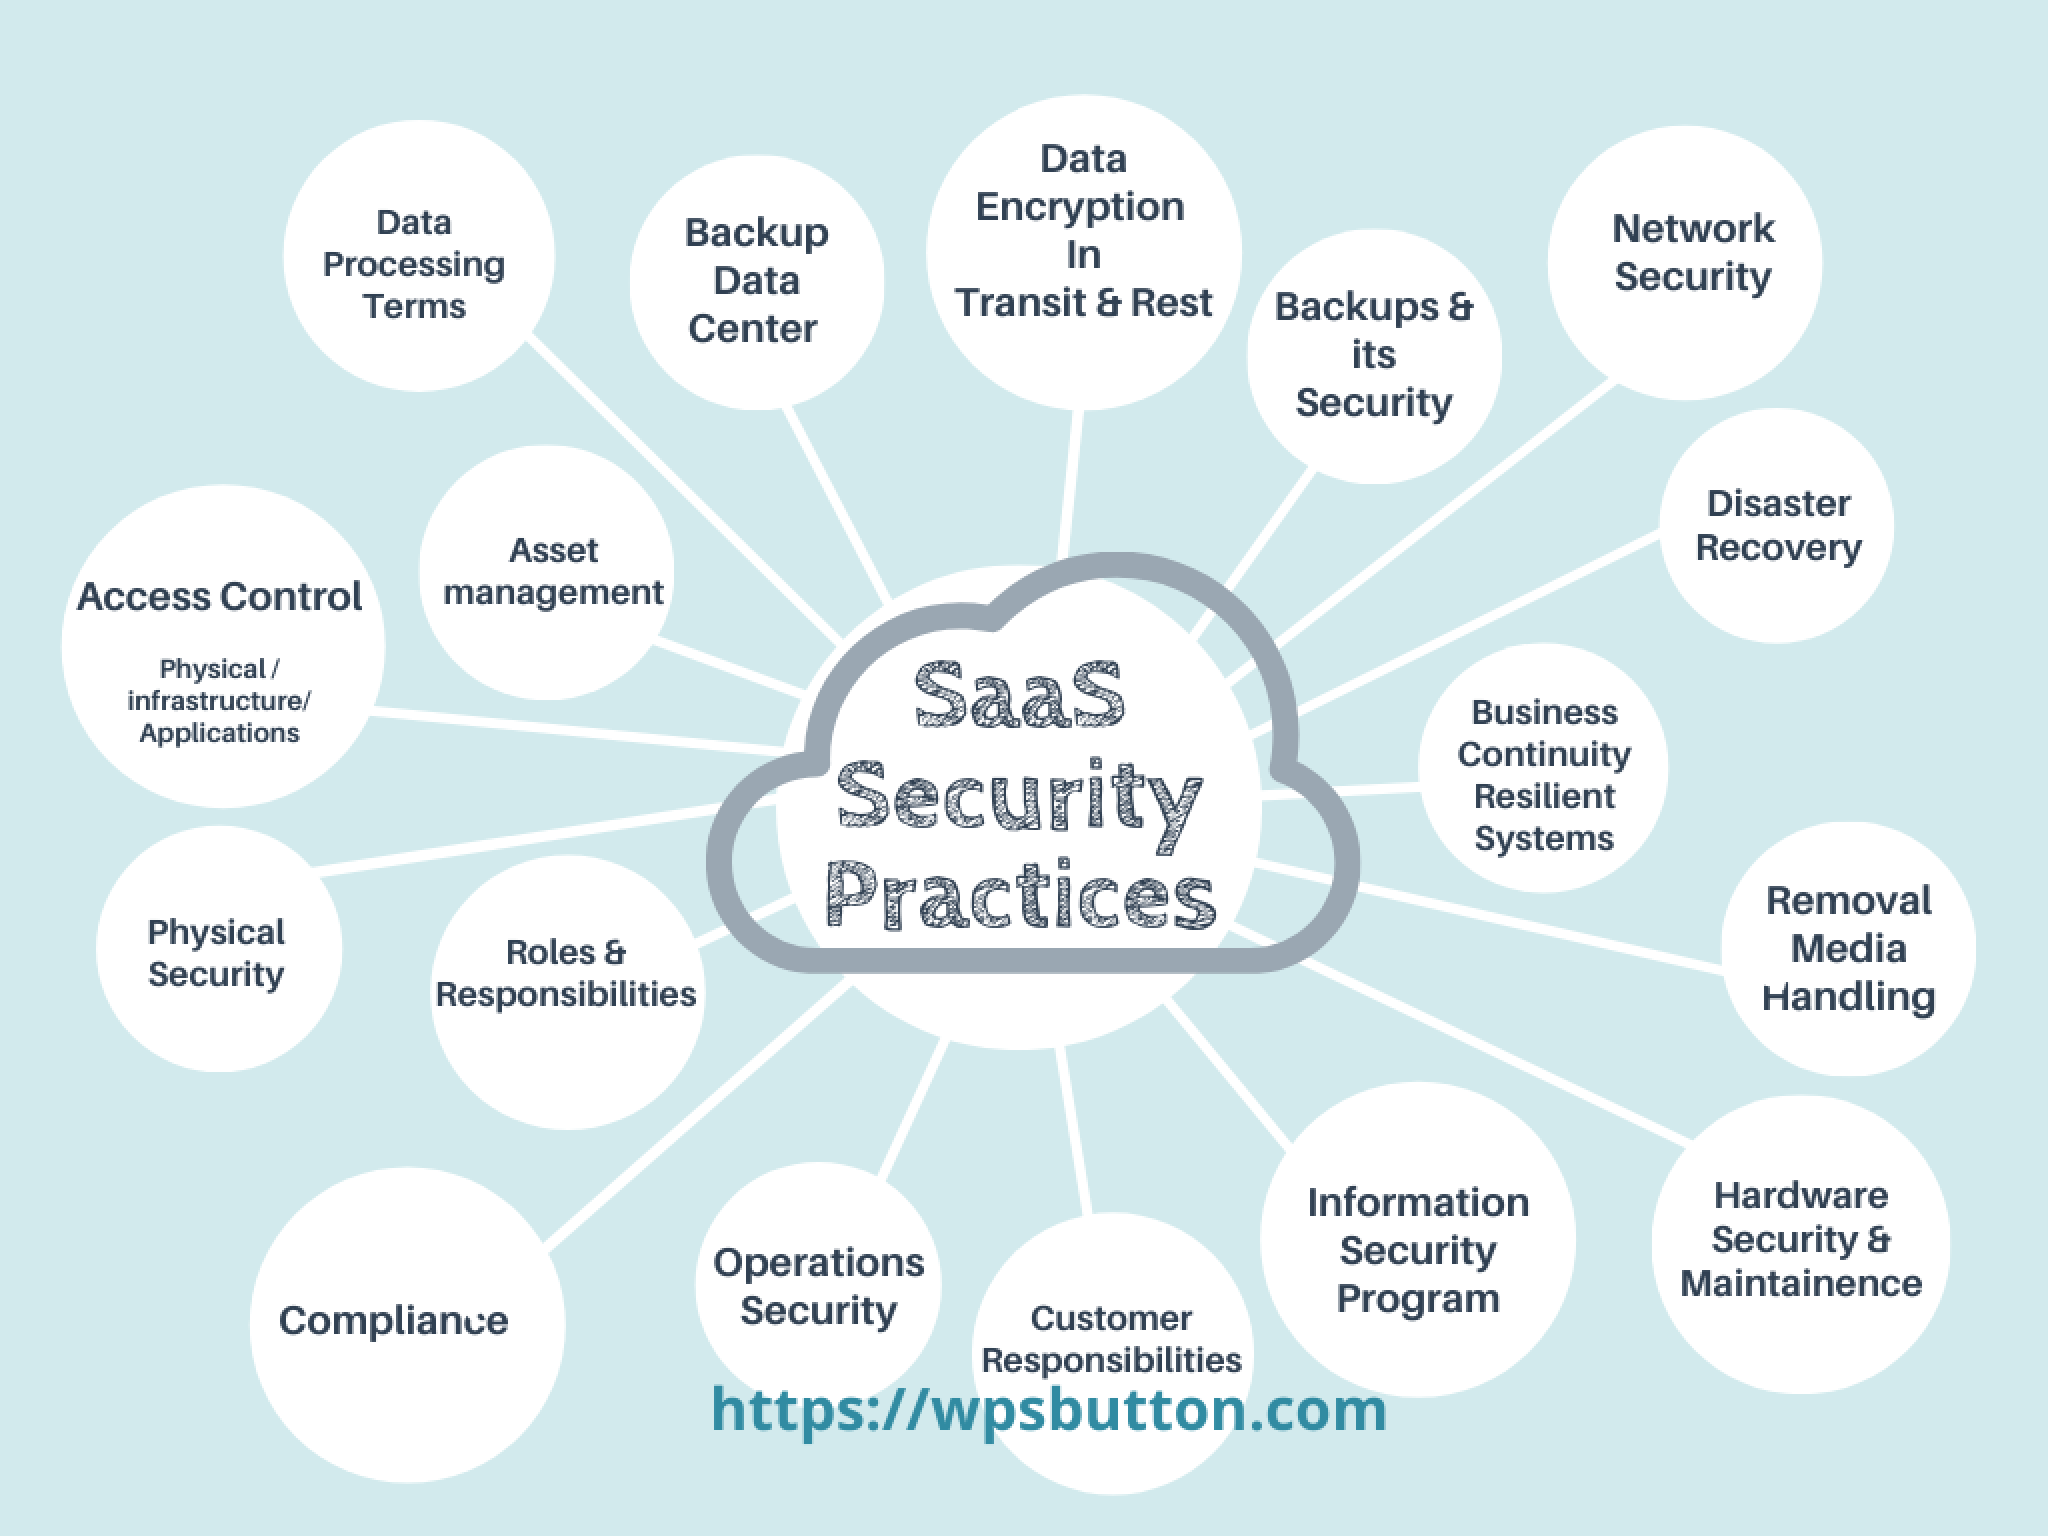 A diagram of SaaS security best practices, including data processing terms, backup center, encryption, backups and its security, network security, disaster recovery, business continuity, resilient systems, removal media handling, hardware security and maintenance, information security program, customer security, operations security, roles and responsibilities, access control, physical security, and compliance.